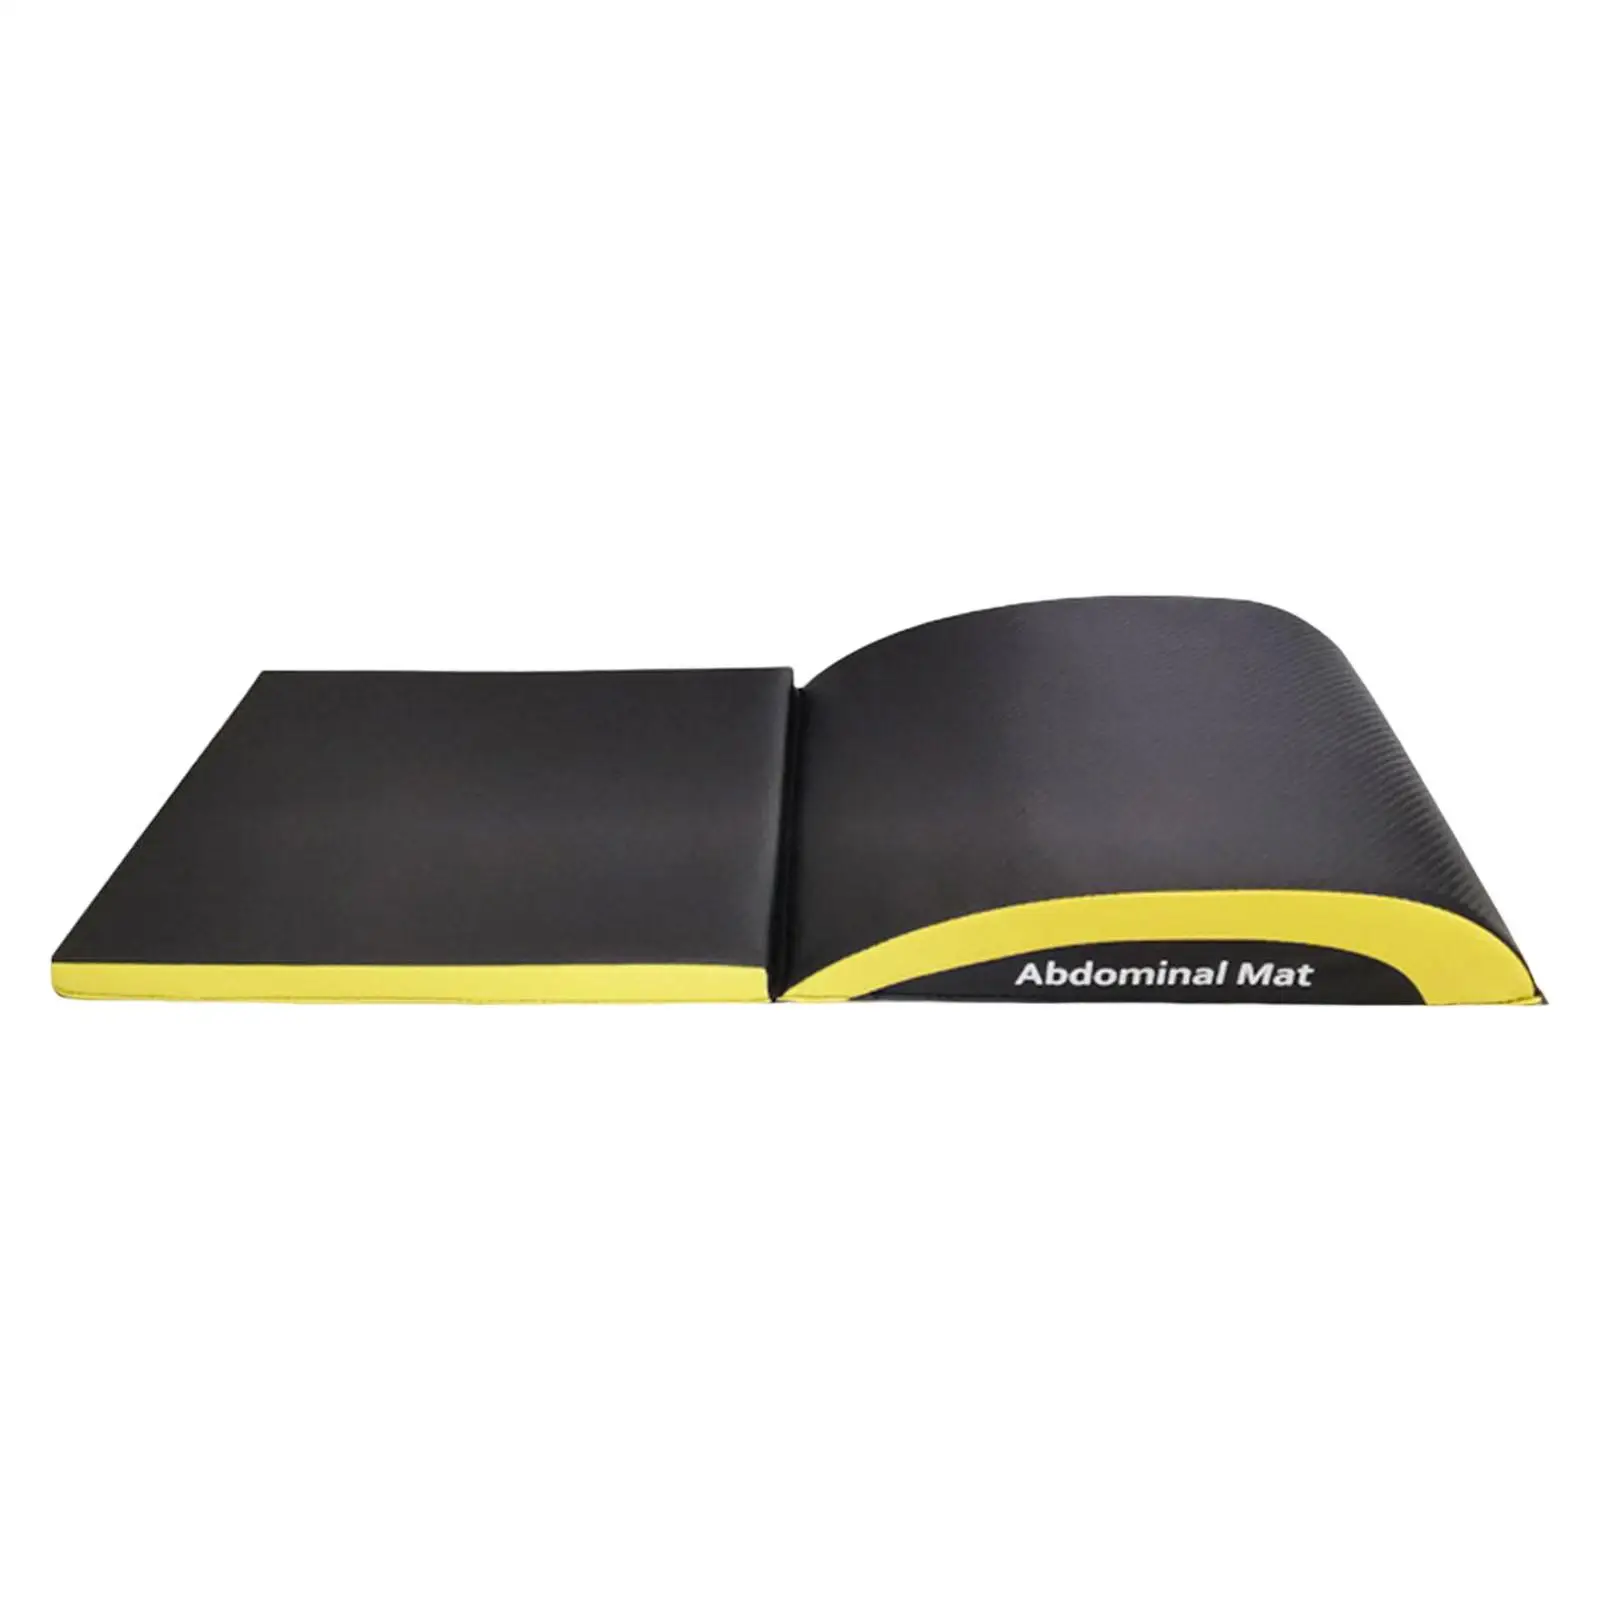 Portable Ab Exercise Mat Abdominal Core Trainer Pad Workout Back Lumbar Support Home Gym Situp Tailbone Protector Folded Cushion